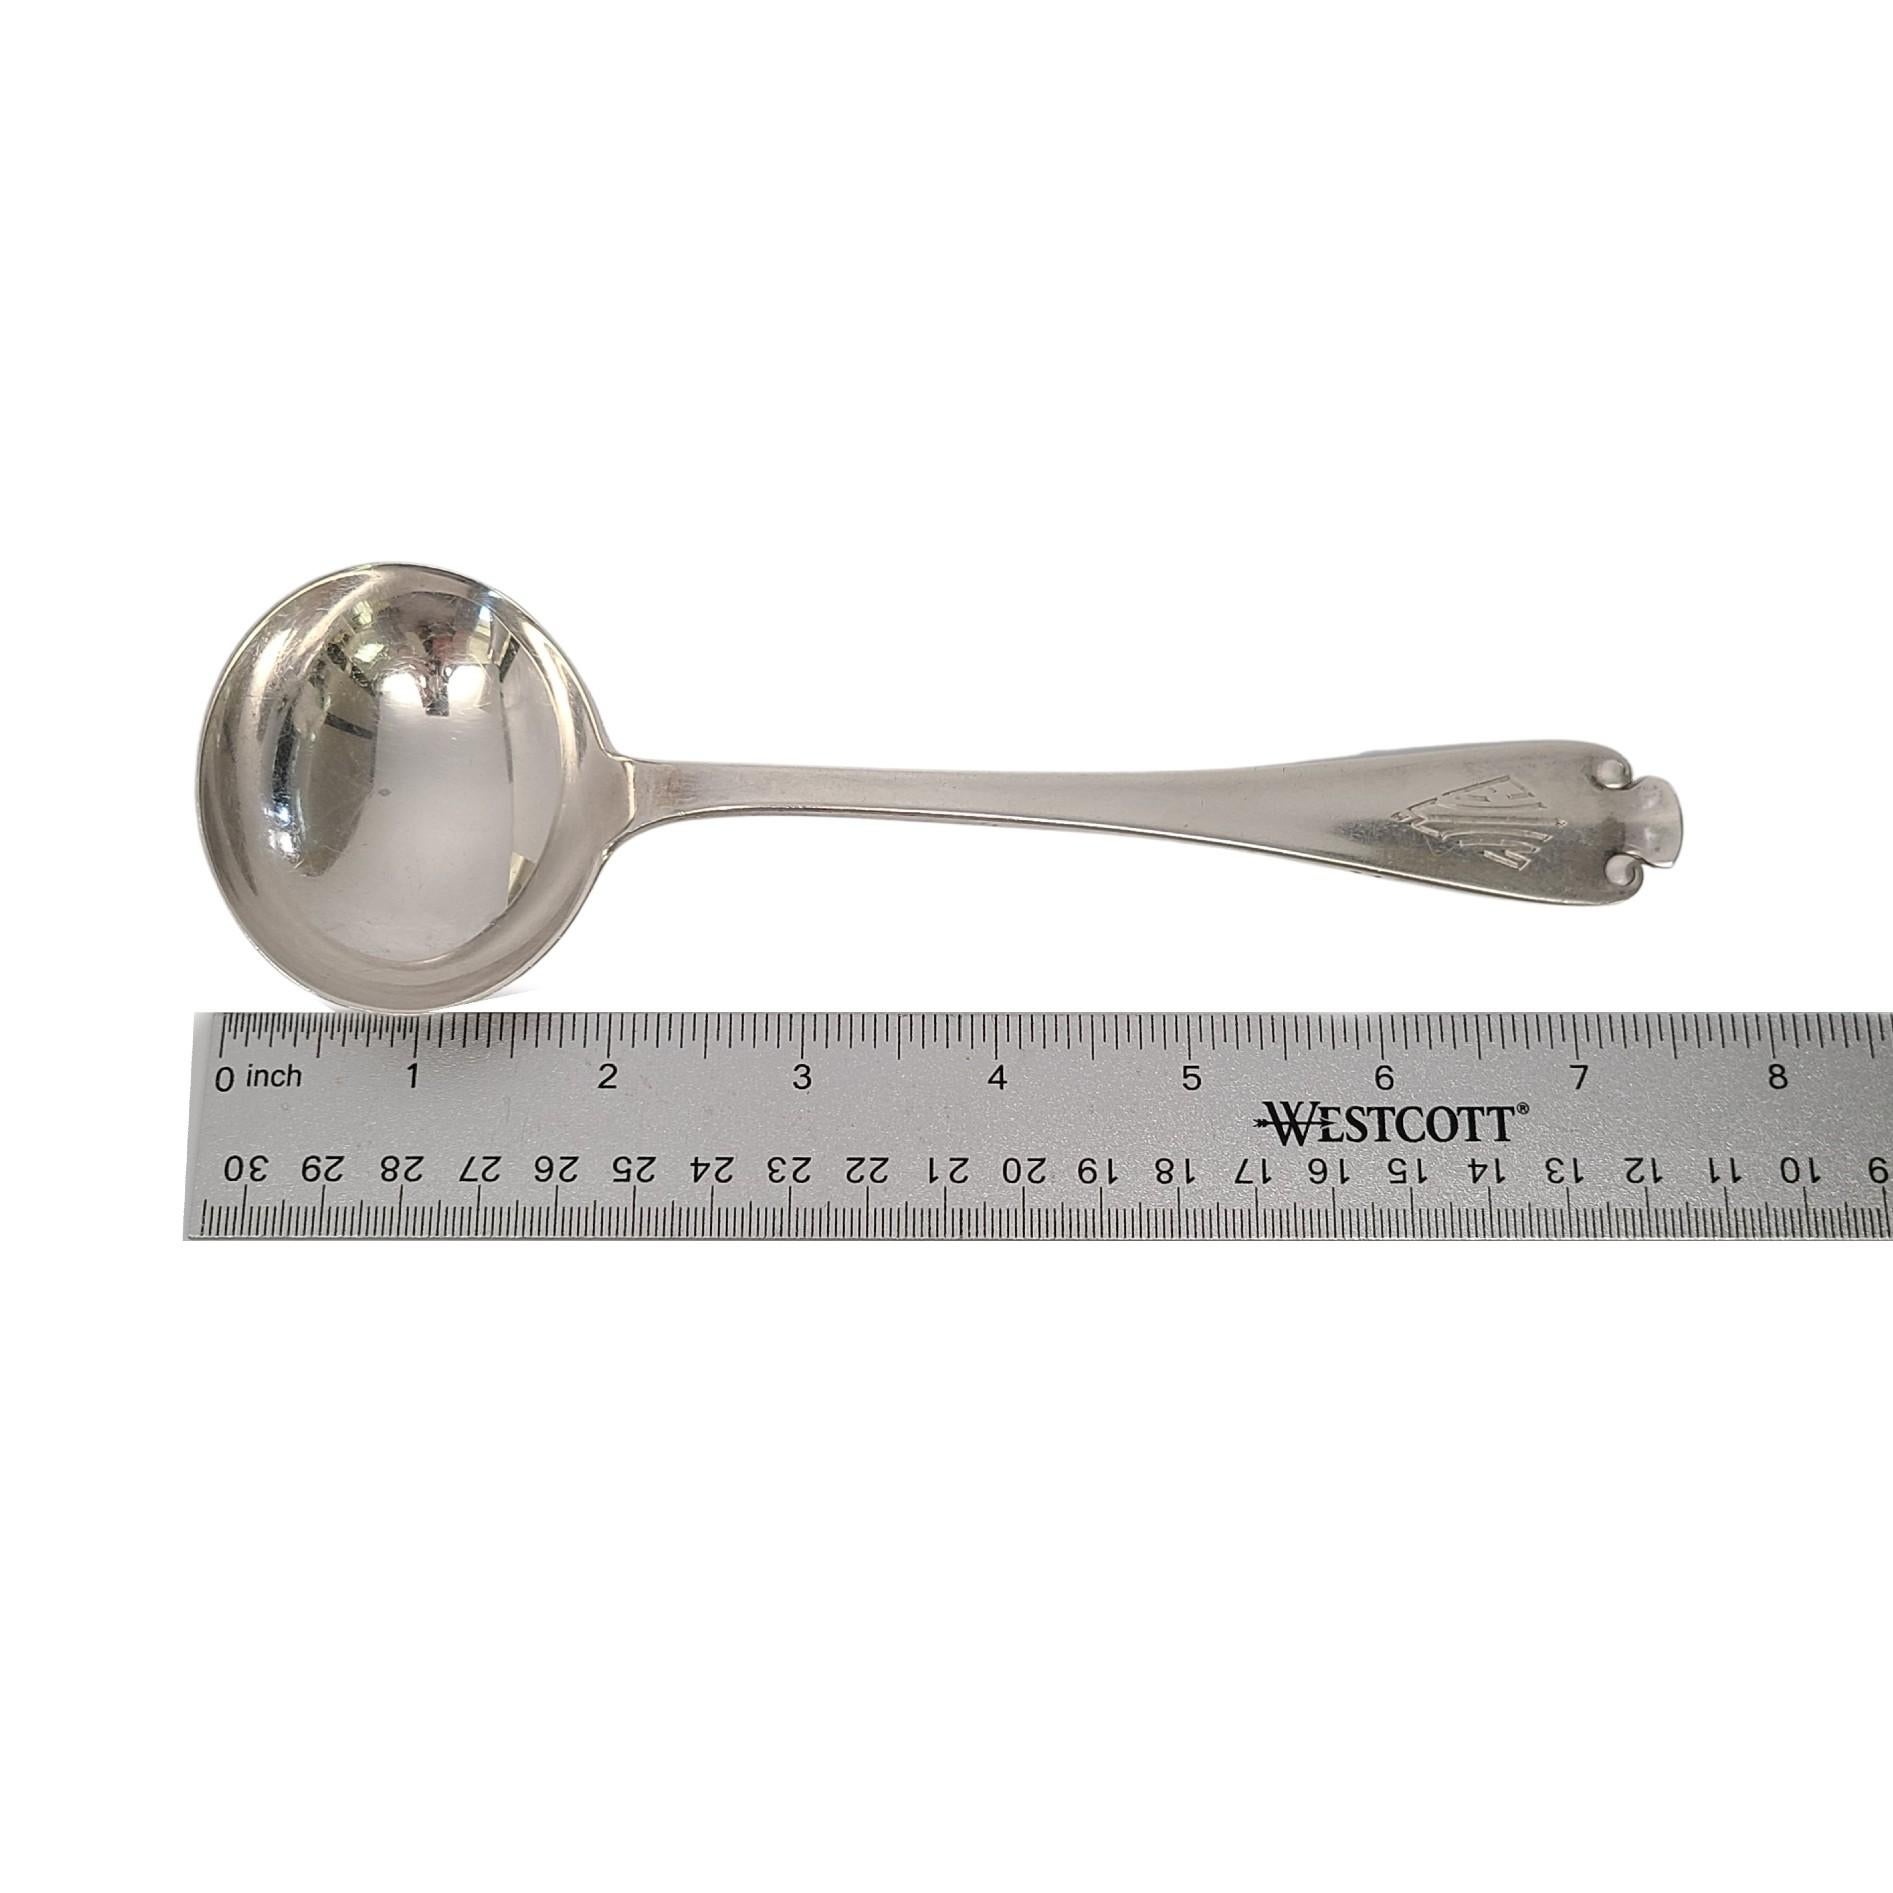 Tiffany & Co Flemish Sterling Silver Gravy Ladle with Monogram For Sale 3